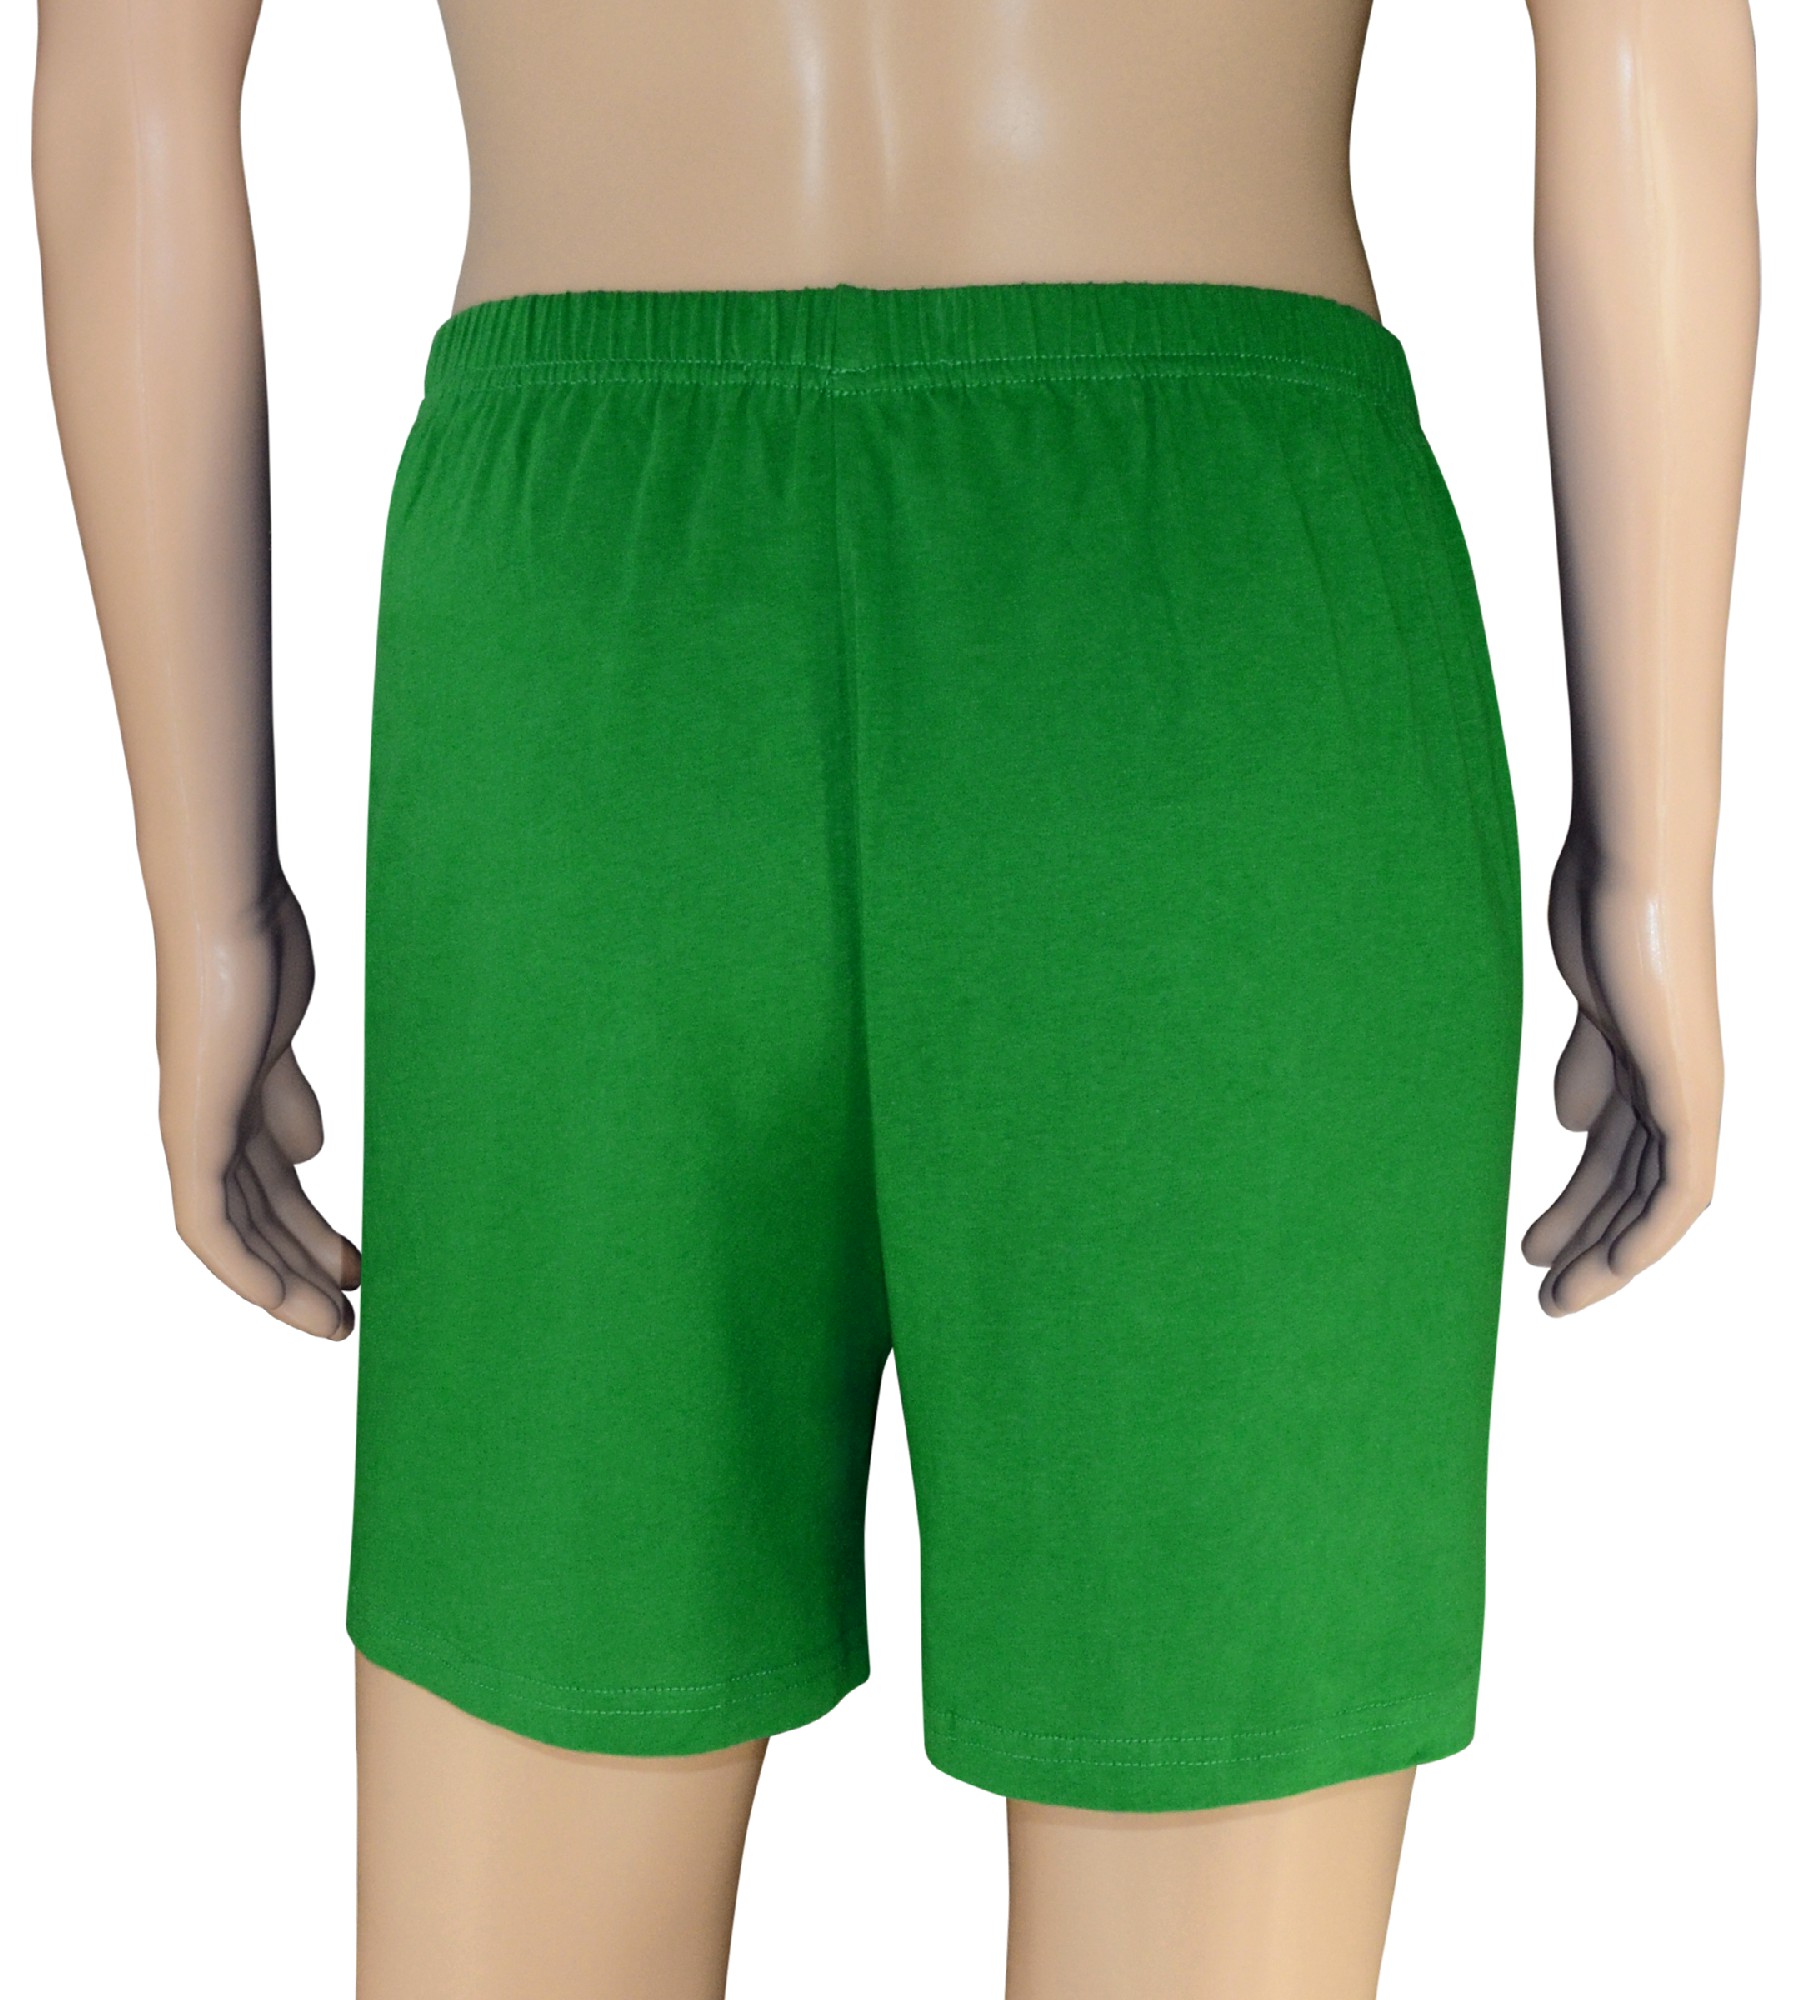 Biagio Mens Solid Emerald Green Color BOXER 100% Knit Cotton Shorts